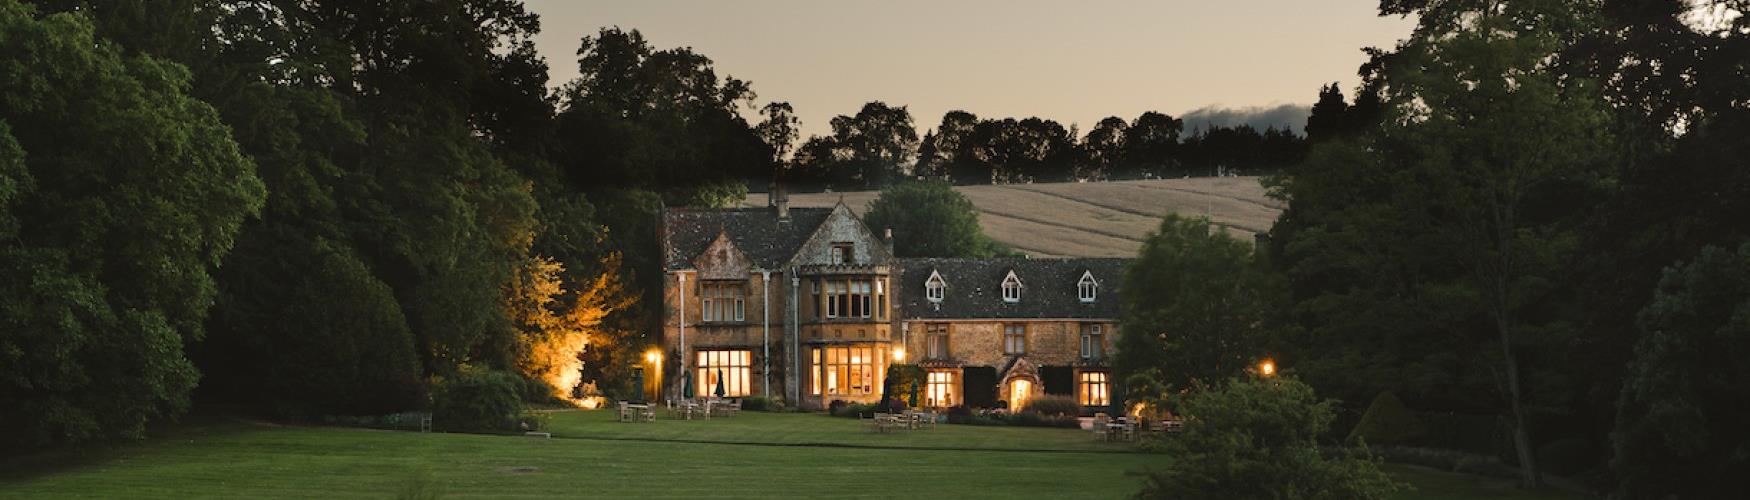 Lords of the Manor Hotel at dusk